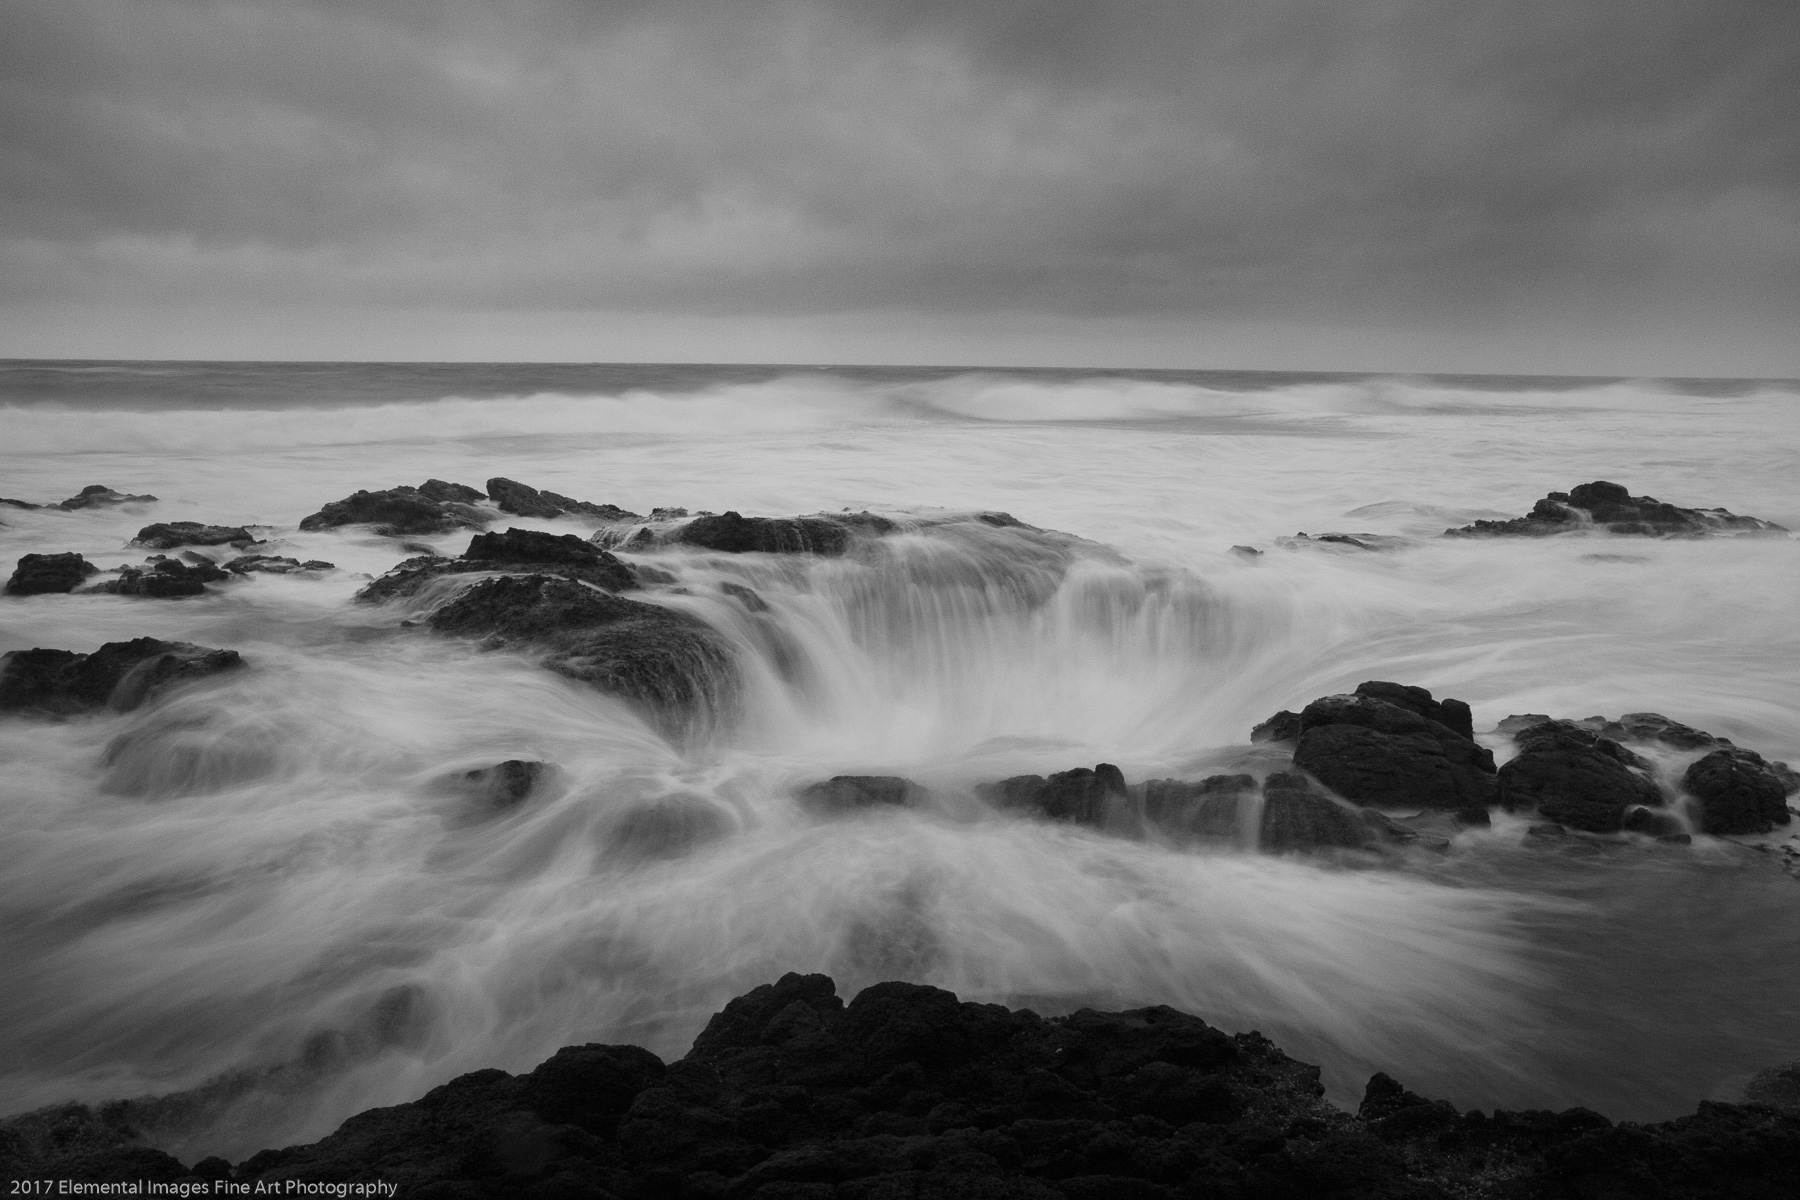 Thor's Well | Cape Perpetua | OR | USA - © 2017 Elemental Images Fine Art Photography - All Rights Reserved Worldwide